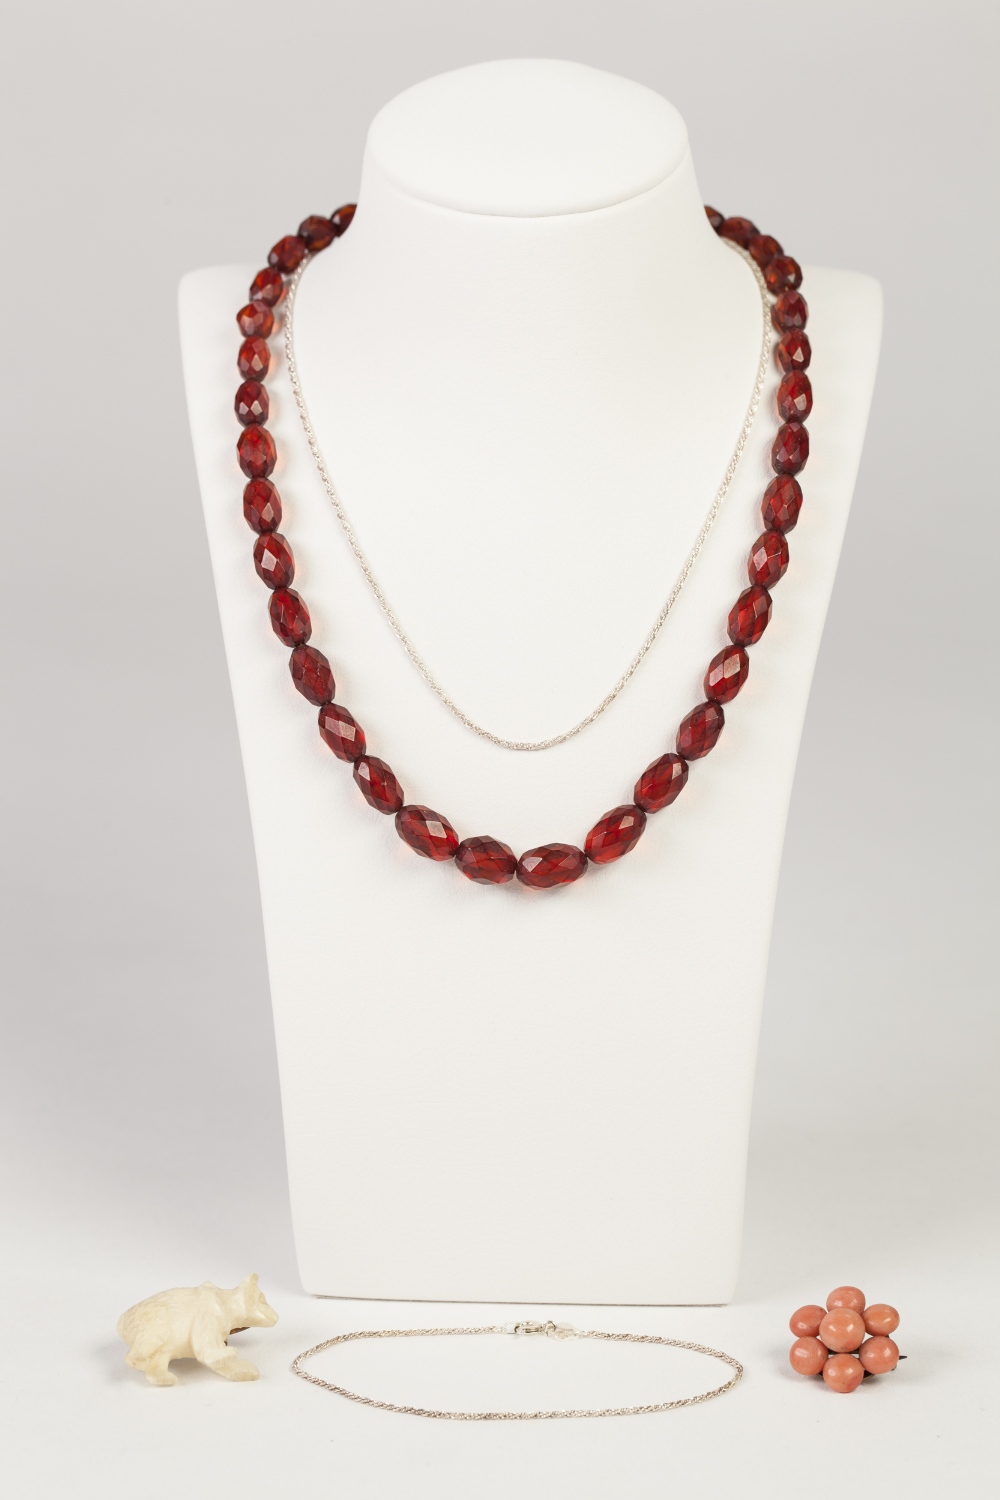 SINGLE STRAND NECKLACE OF RED AMBER FACETED GRADUATED OVAL BEADS, 15" long, PINK CORAL DAISY CLUSTER